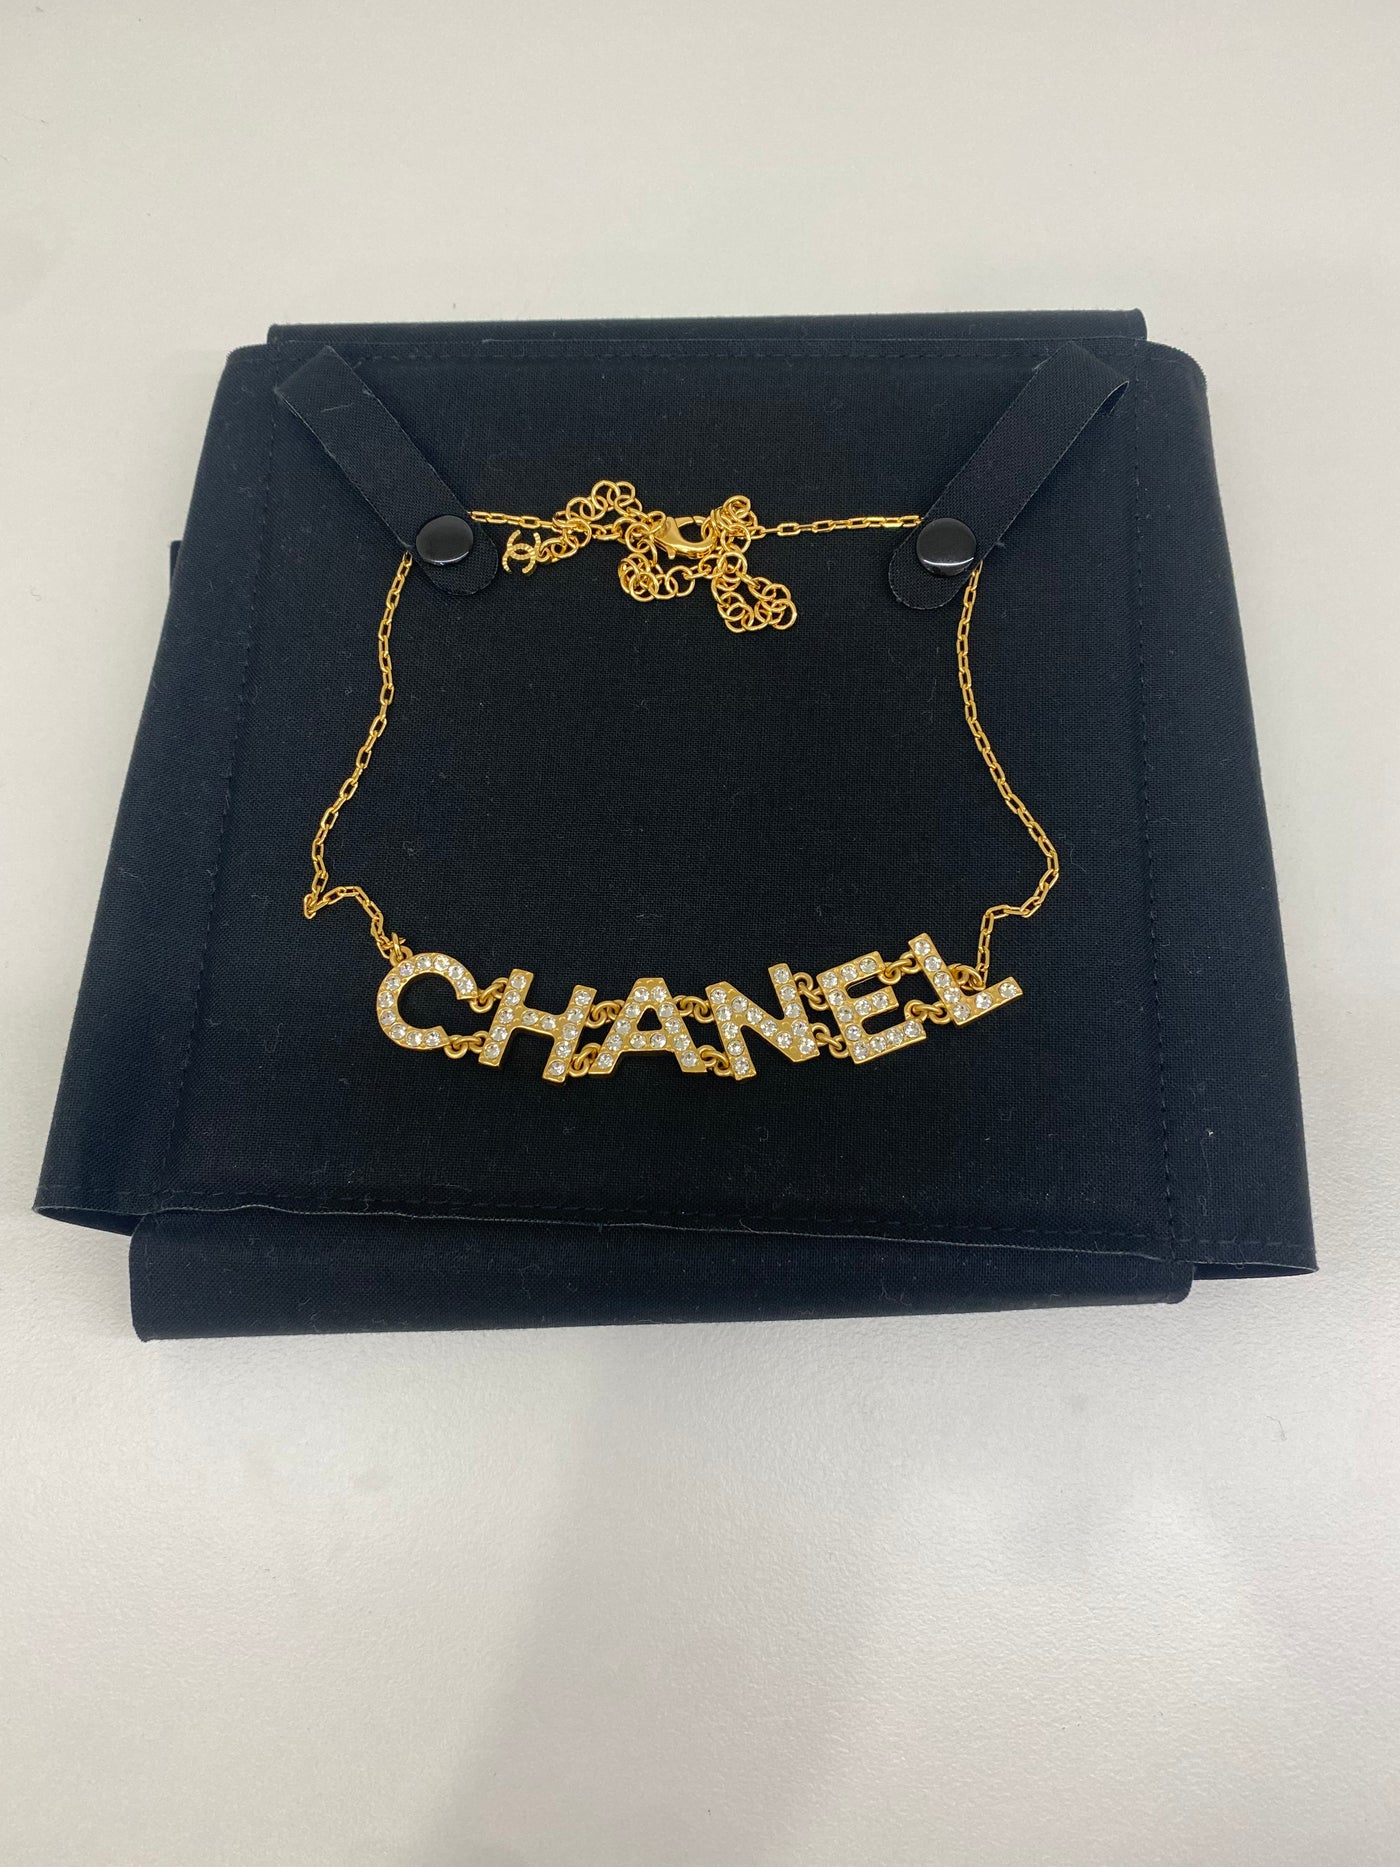 Chanel Crystal 'CHANEL' Necklace